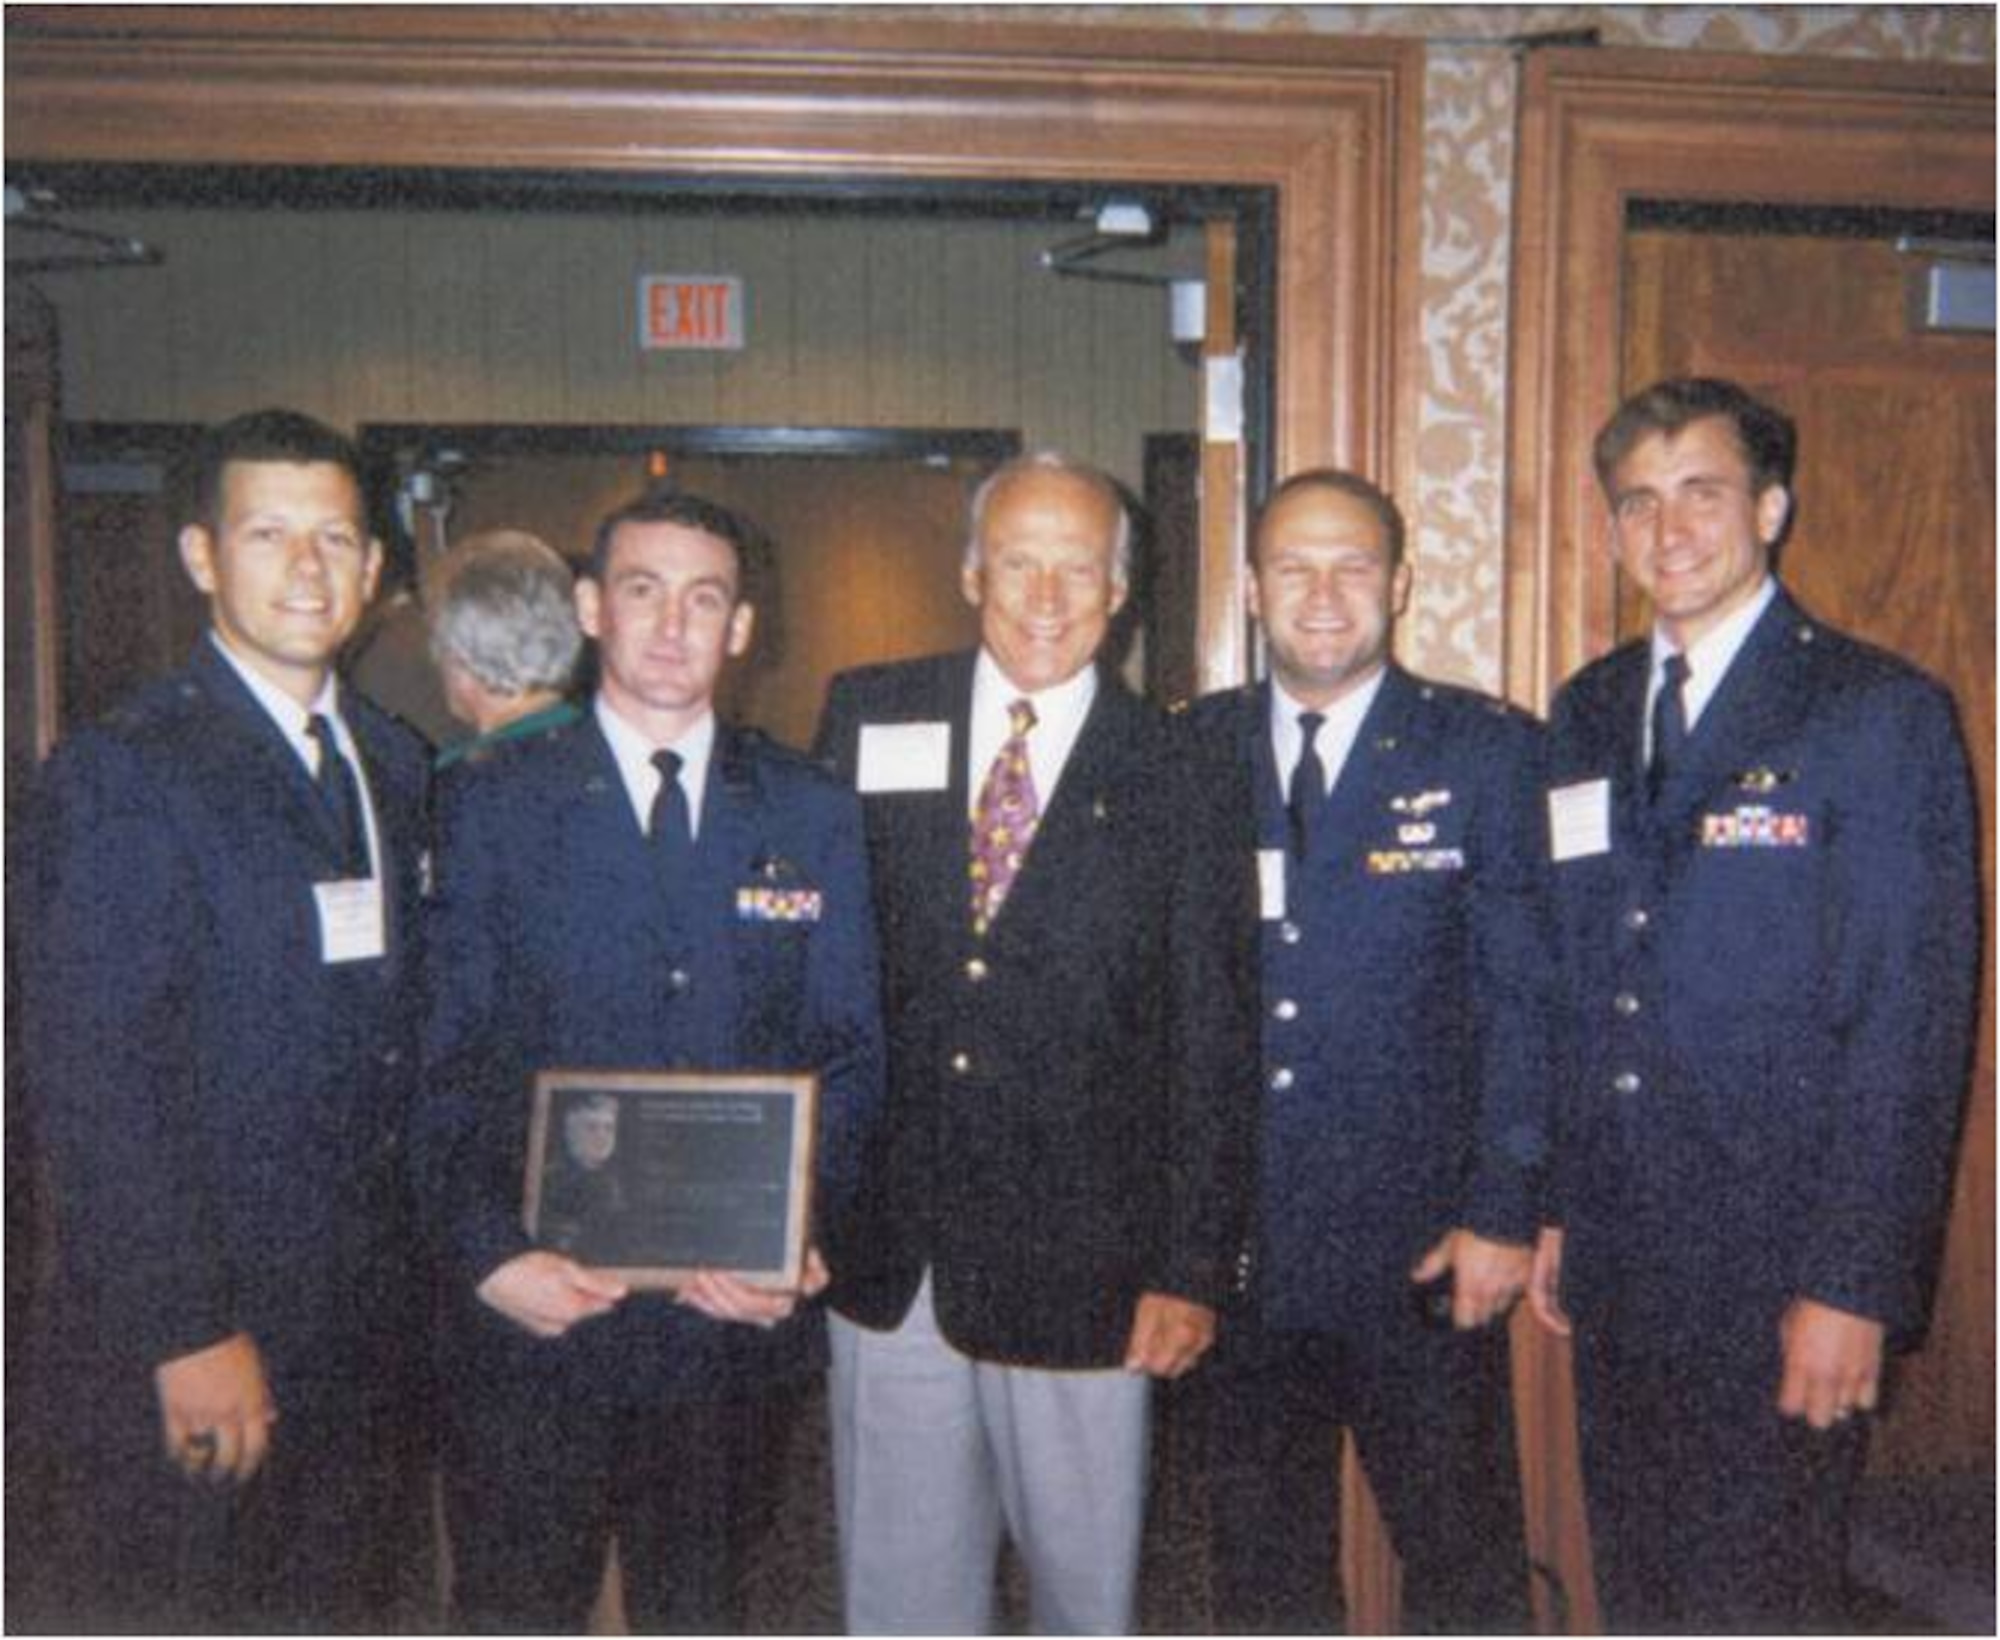 (From left to right) Capt. John Martin, Capt. Randy Kaufman, Apollo astronaut Buzz Aldrin, Capt. Joe Reidy and Capt. Jeffrey Taliaferro gather after winning the Lemay Award for their work during Operation Desert Fox at the Air Force Association banquet in Washington, D.C., September 1999. The four captains manned the B-1 bomber codenamed "Slam 4" and were recognized for being the most outstanding aircrew in the Air Force. (U.S. Air Force courtesy photo/Released)